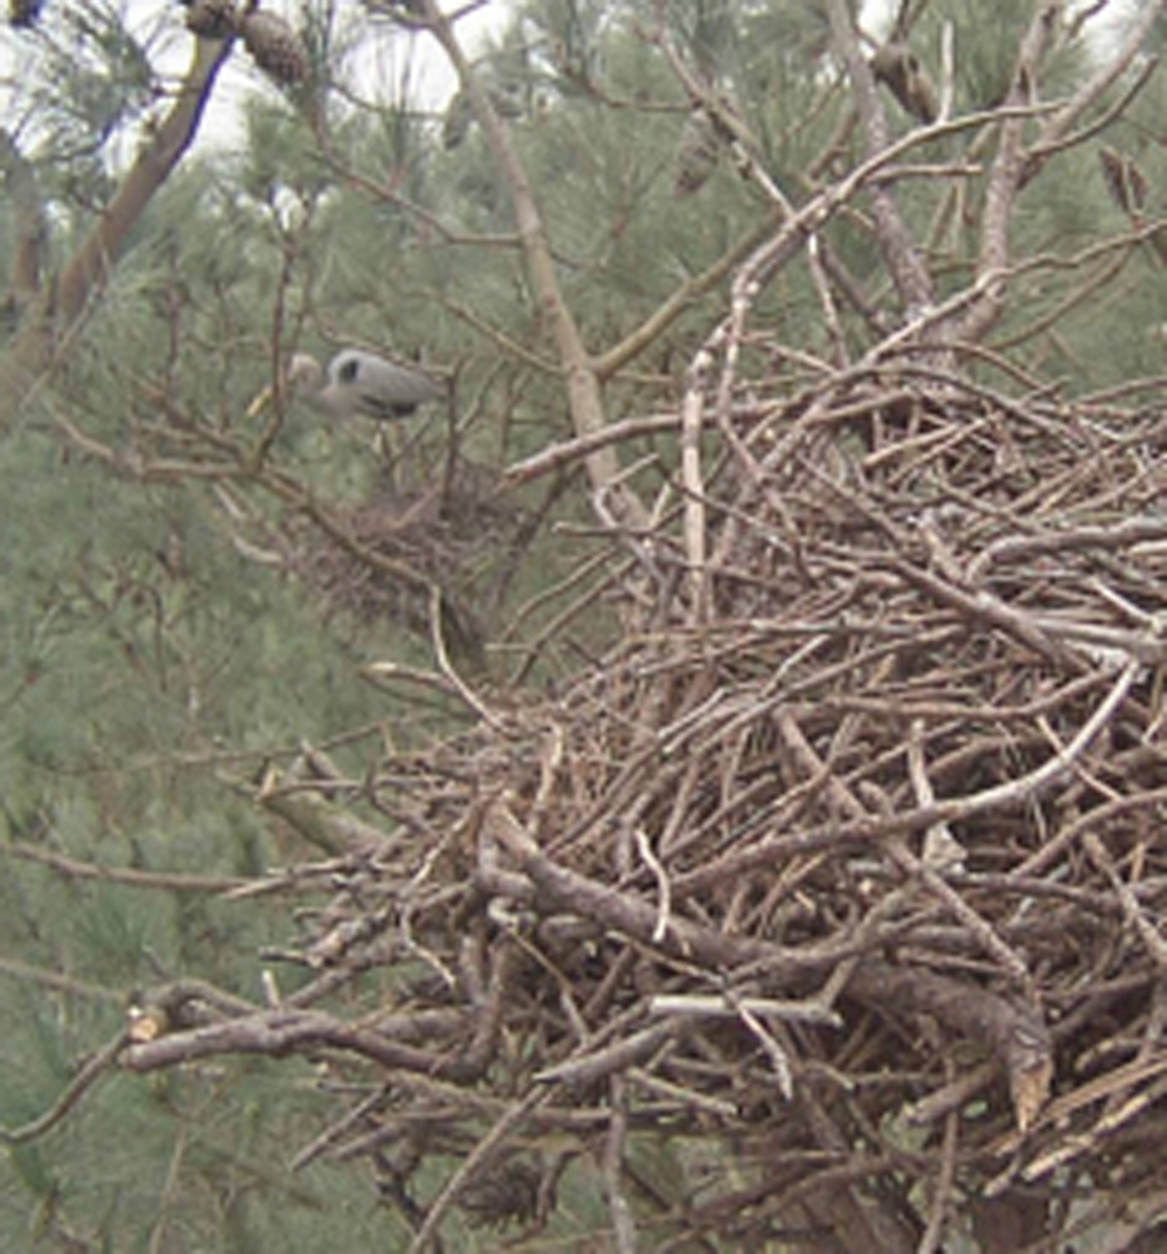 Another look at a heron's nest, taken by tree climber while installing equipment for a webcam. (Courtesy Great Blue Heron Rookery)